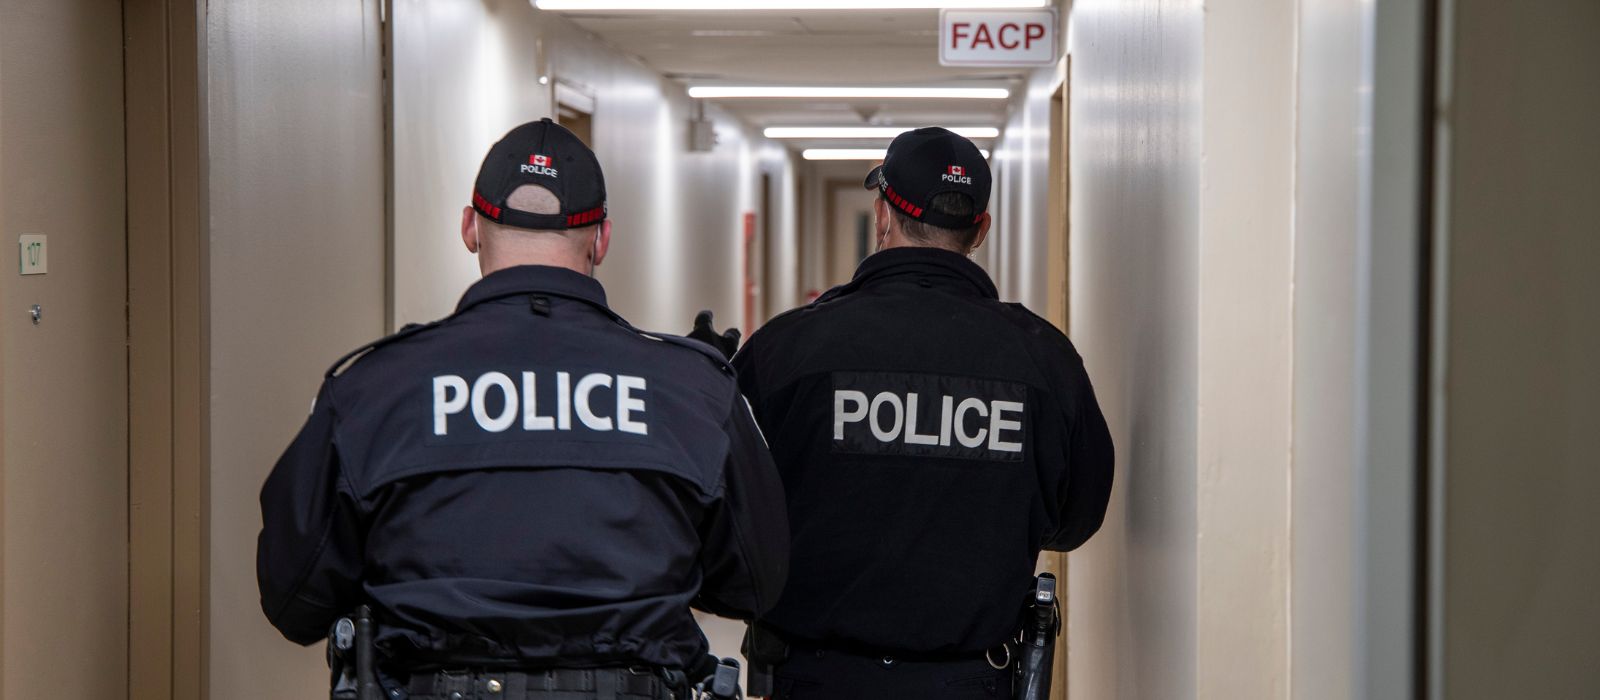 Two Ottawa Police Officers walking through the hallway of an apartment building.